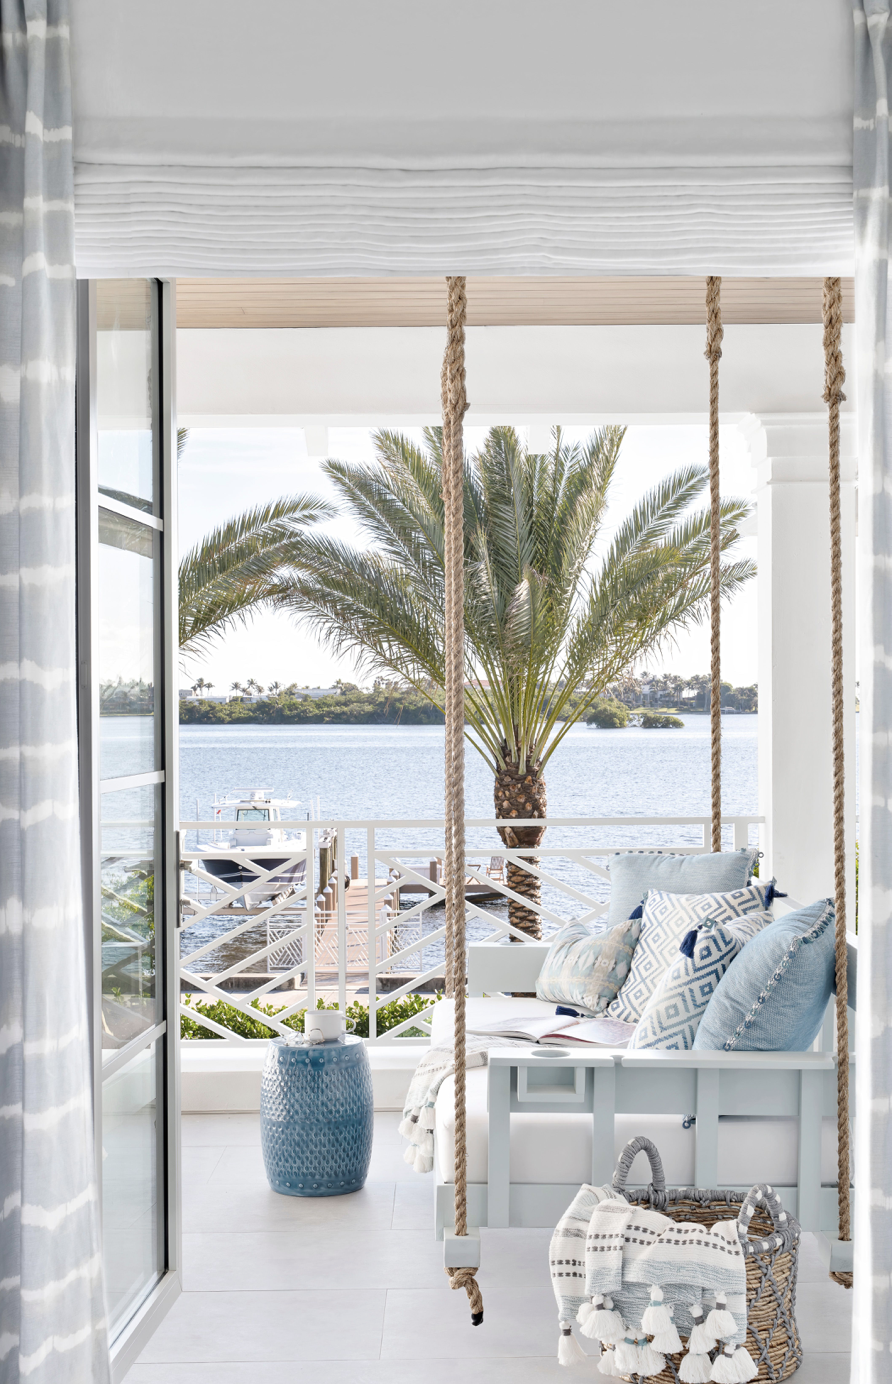 It’s easy to get into the swing of things on this porch overlooking the water. Find similar porch swings here.
